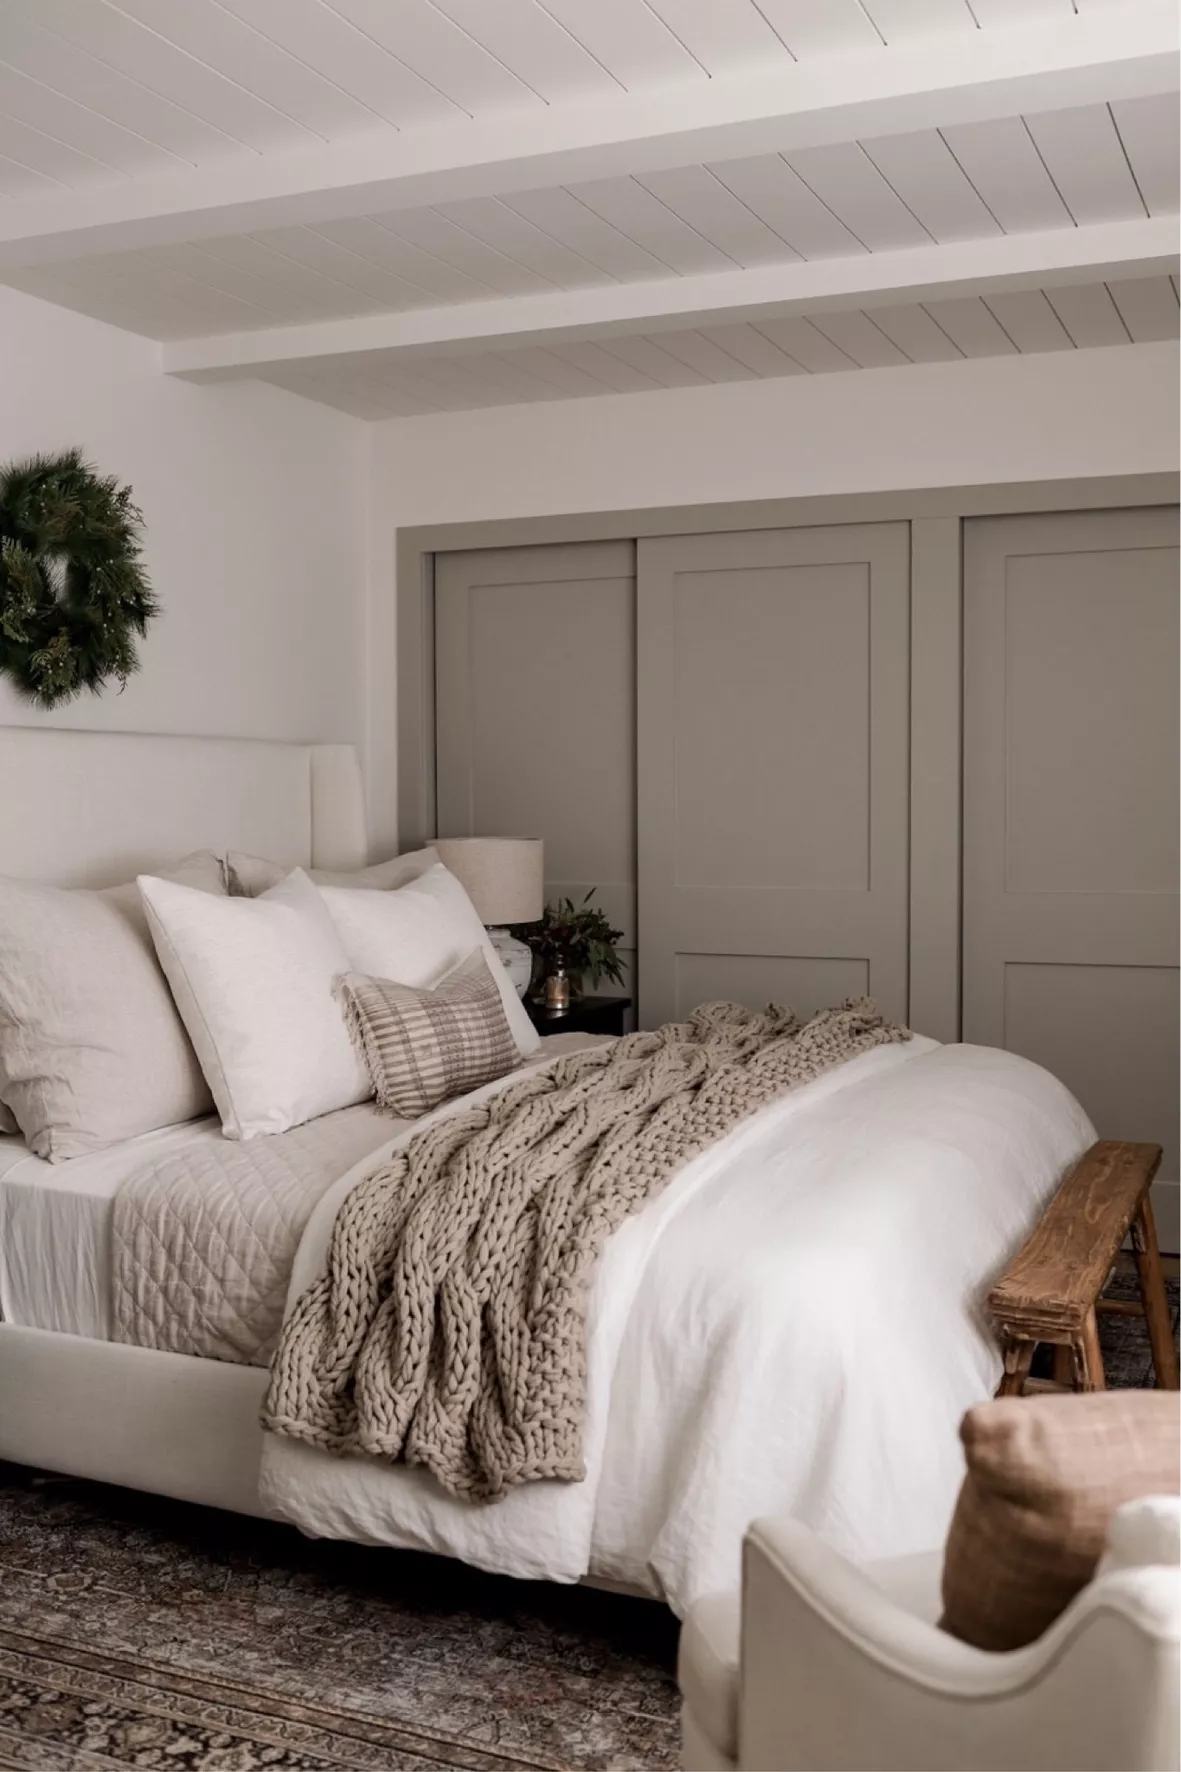 Tilly Upholstered Bed curated on LTK